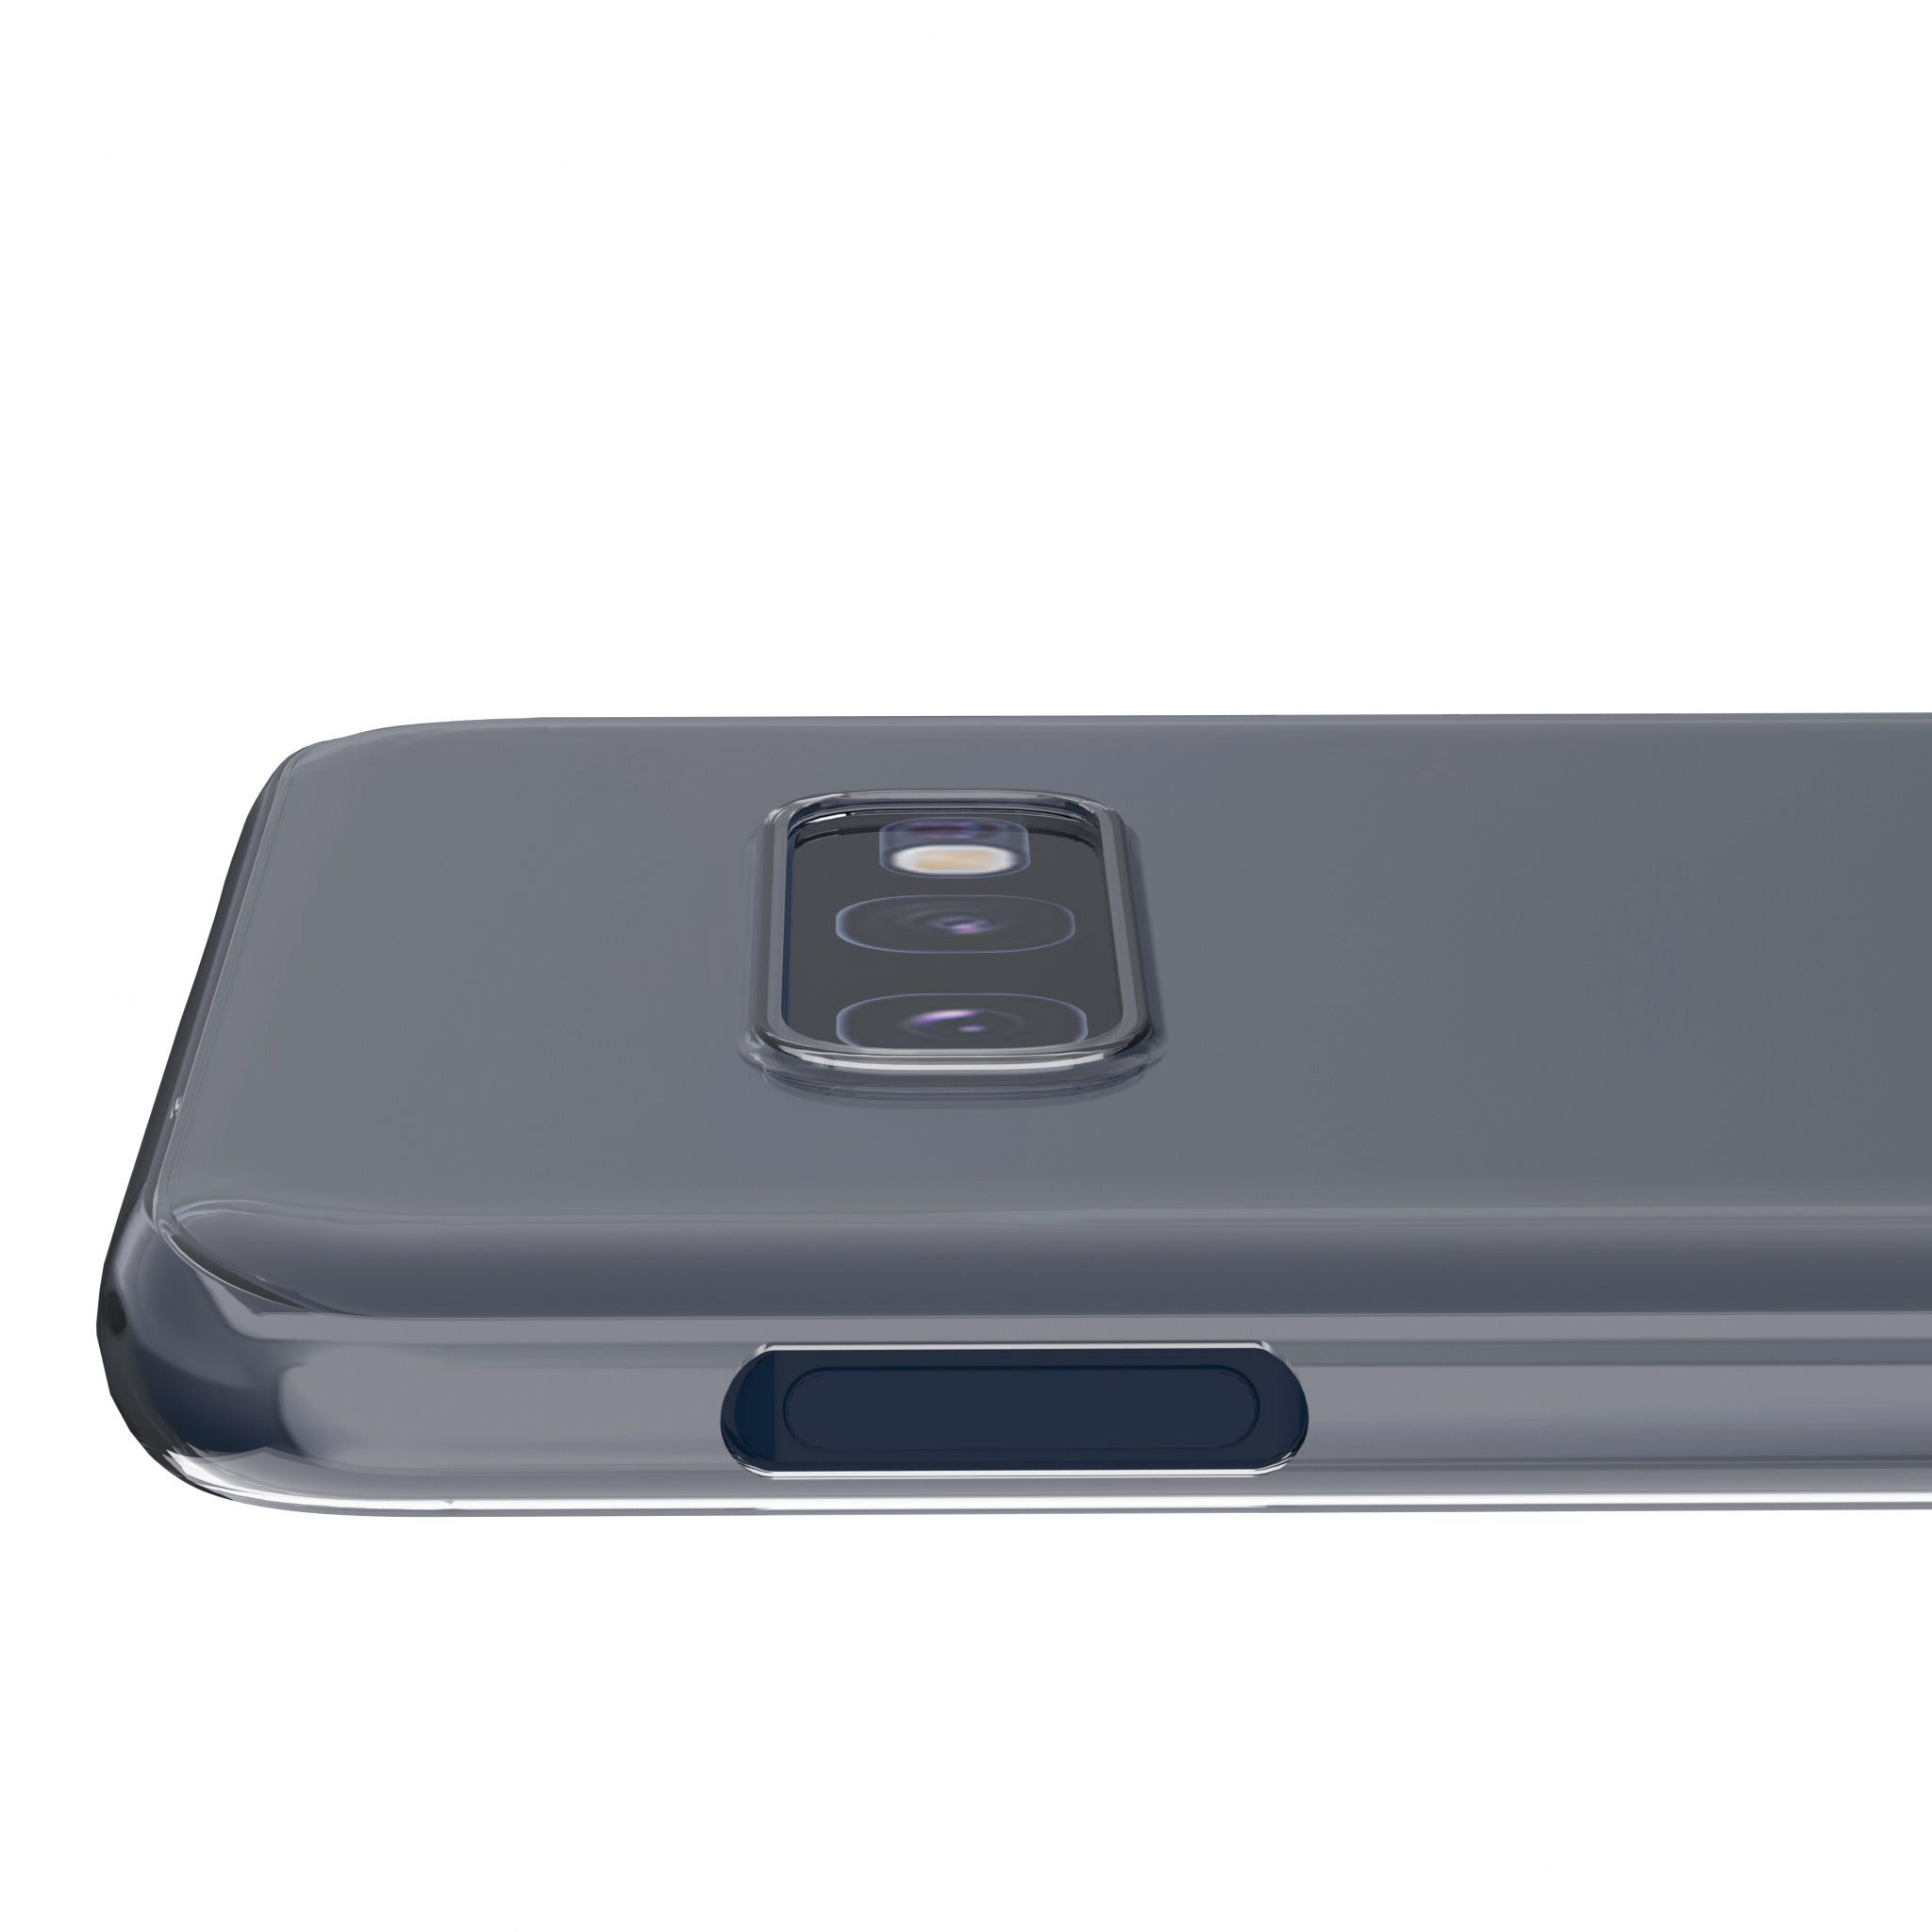 Slimcase for Galaxy S10 Series